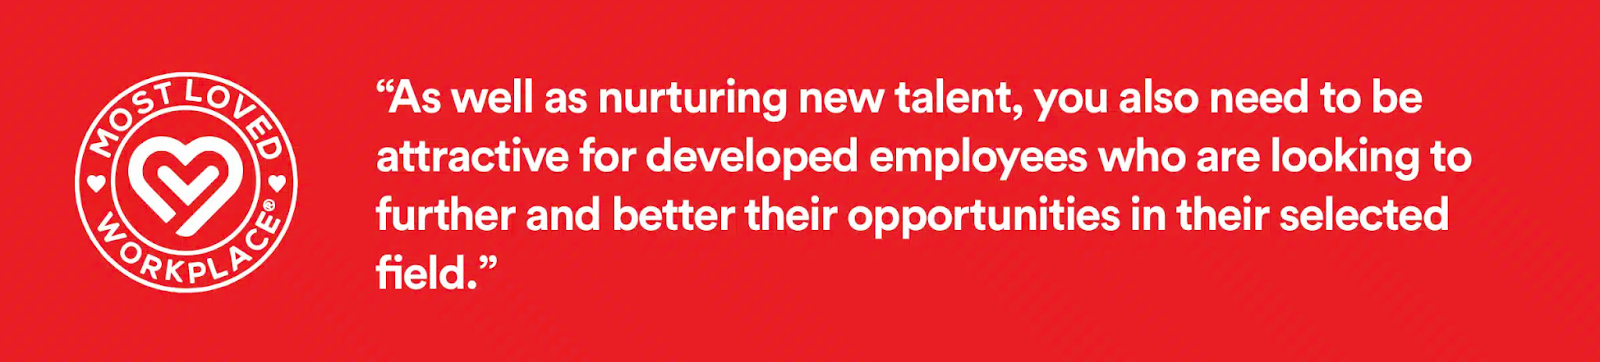 As well as nurturing new talent, you also need to be attractive for developed employees who are looking to further and better their opportunities in their selected field.